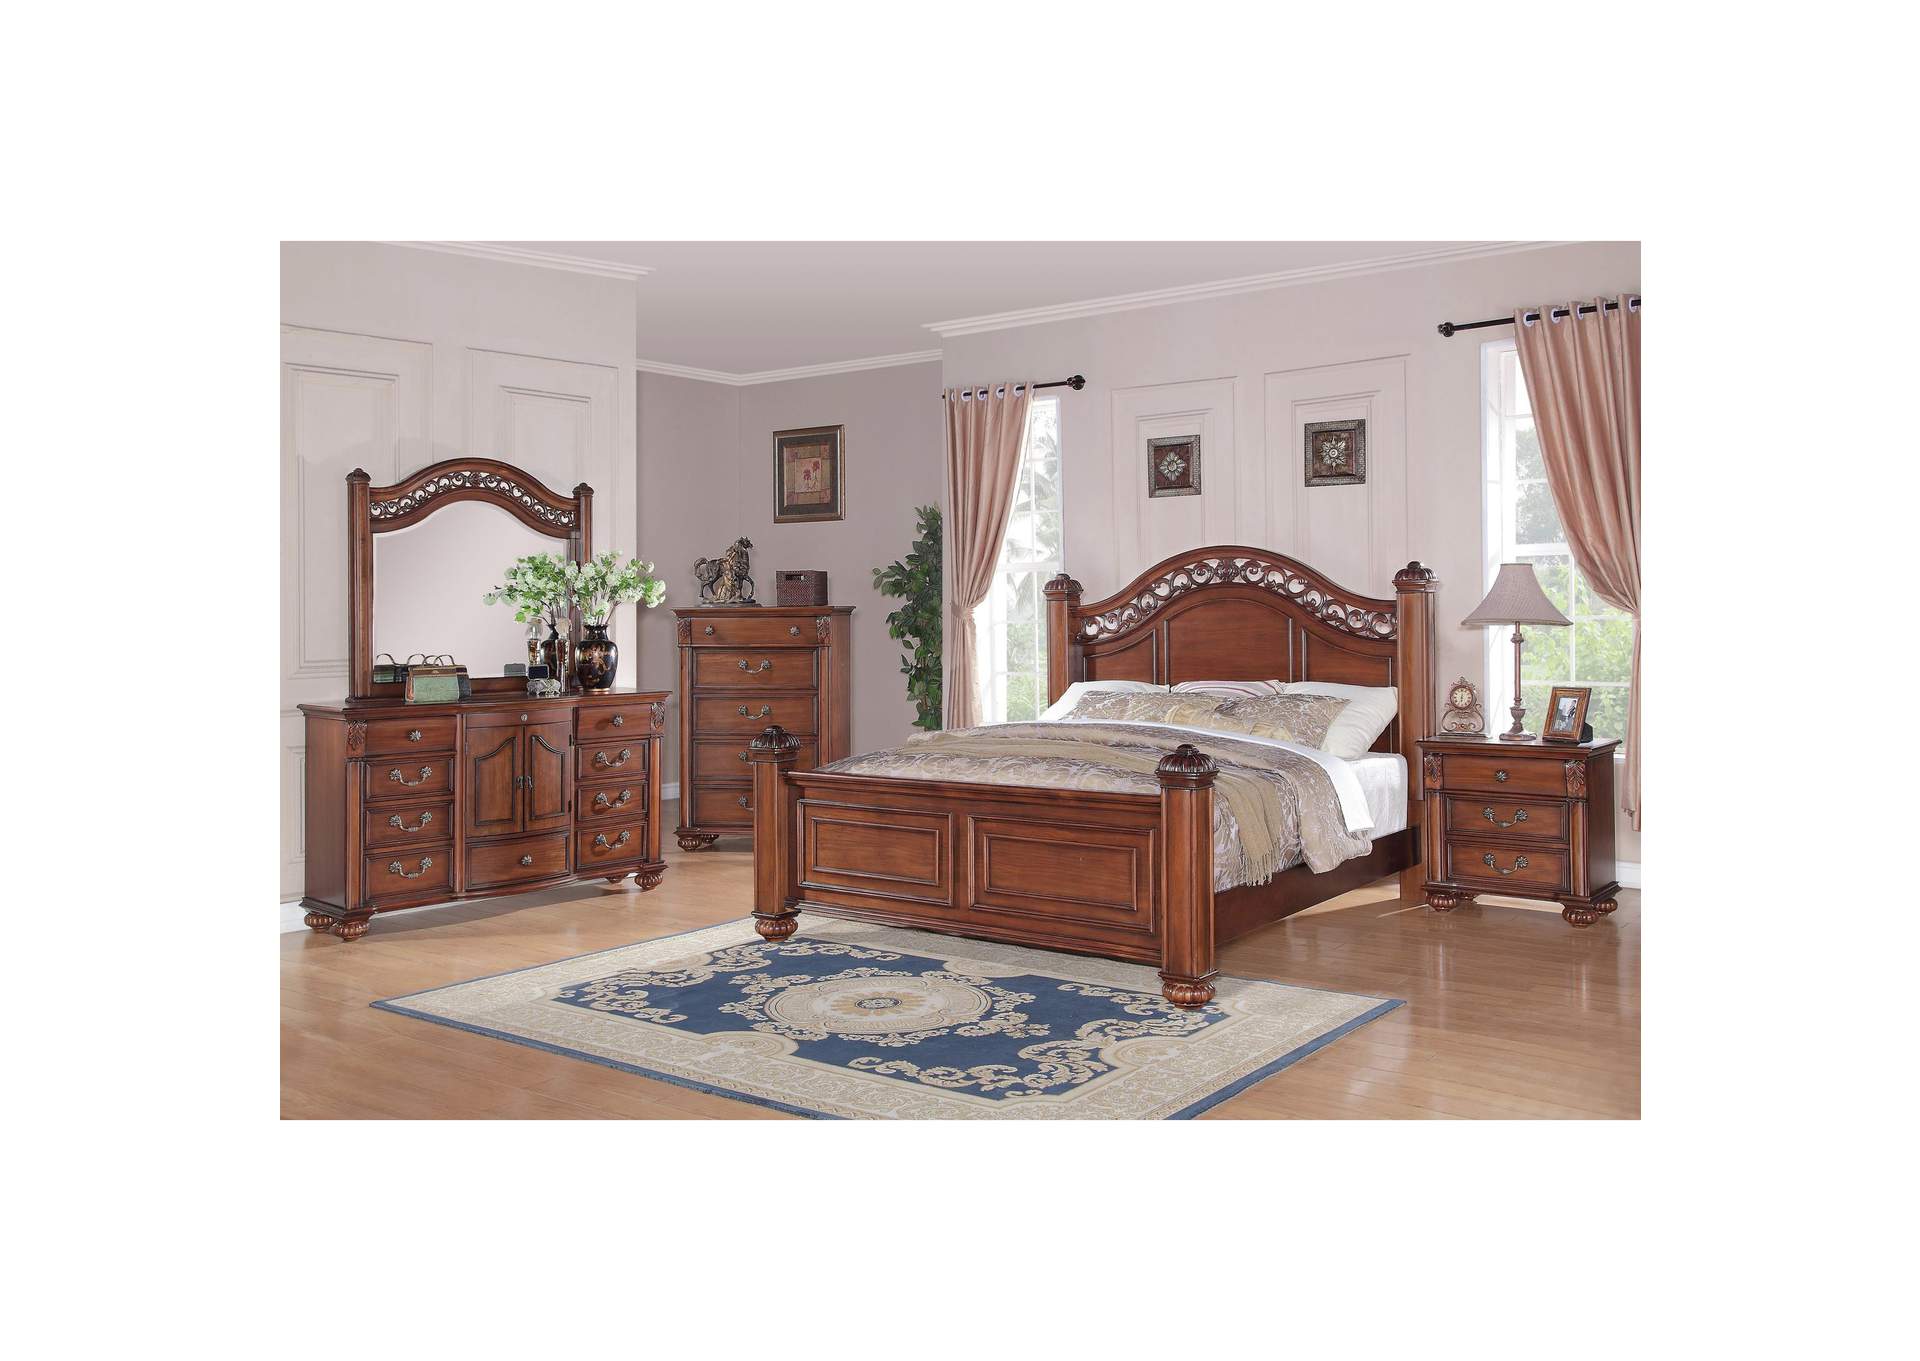 Barkley Square King Poster Bed,Elements